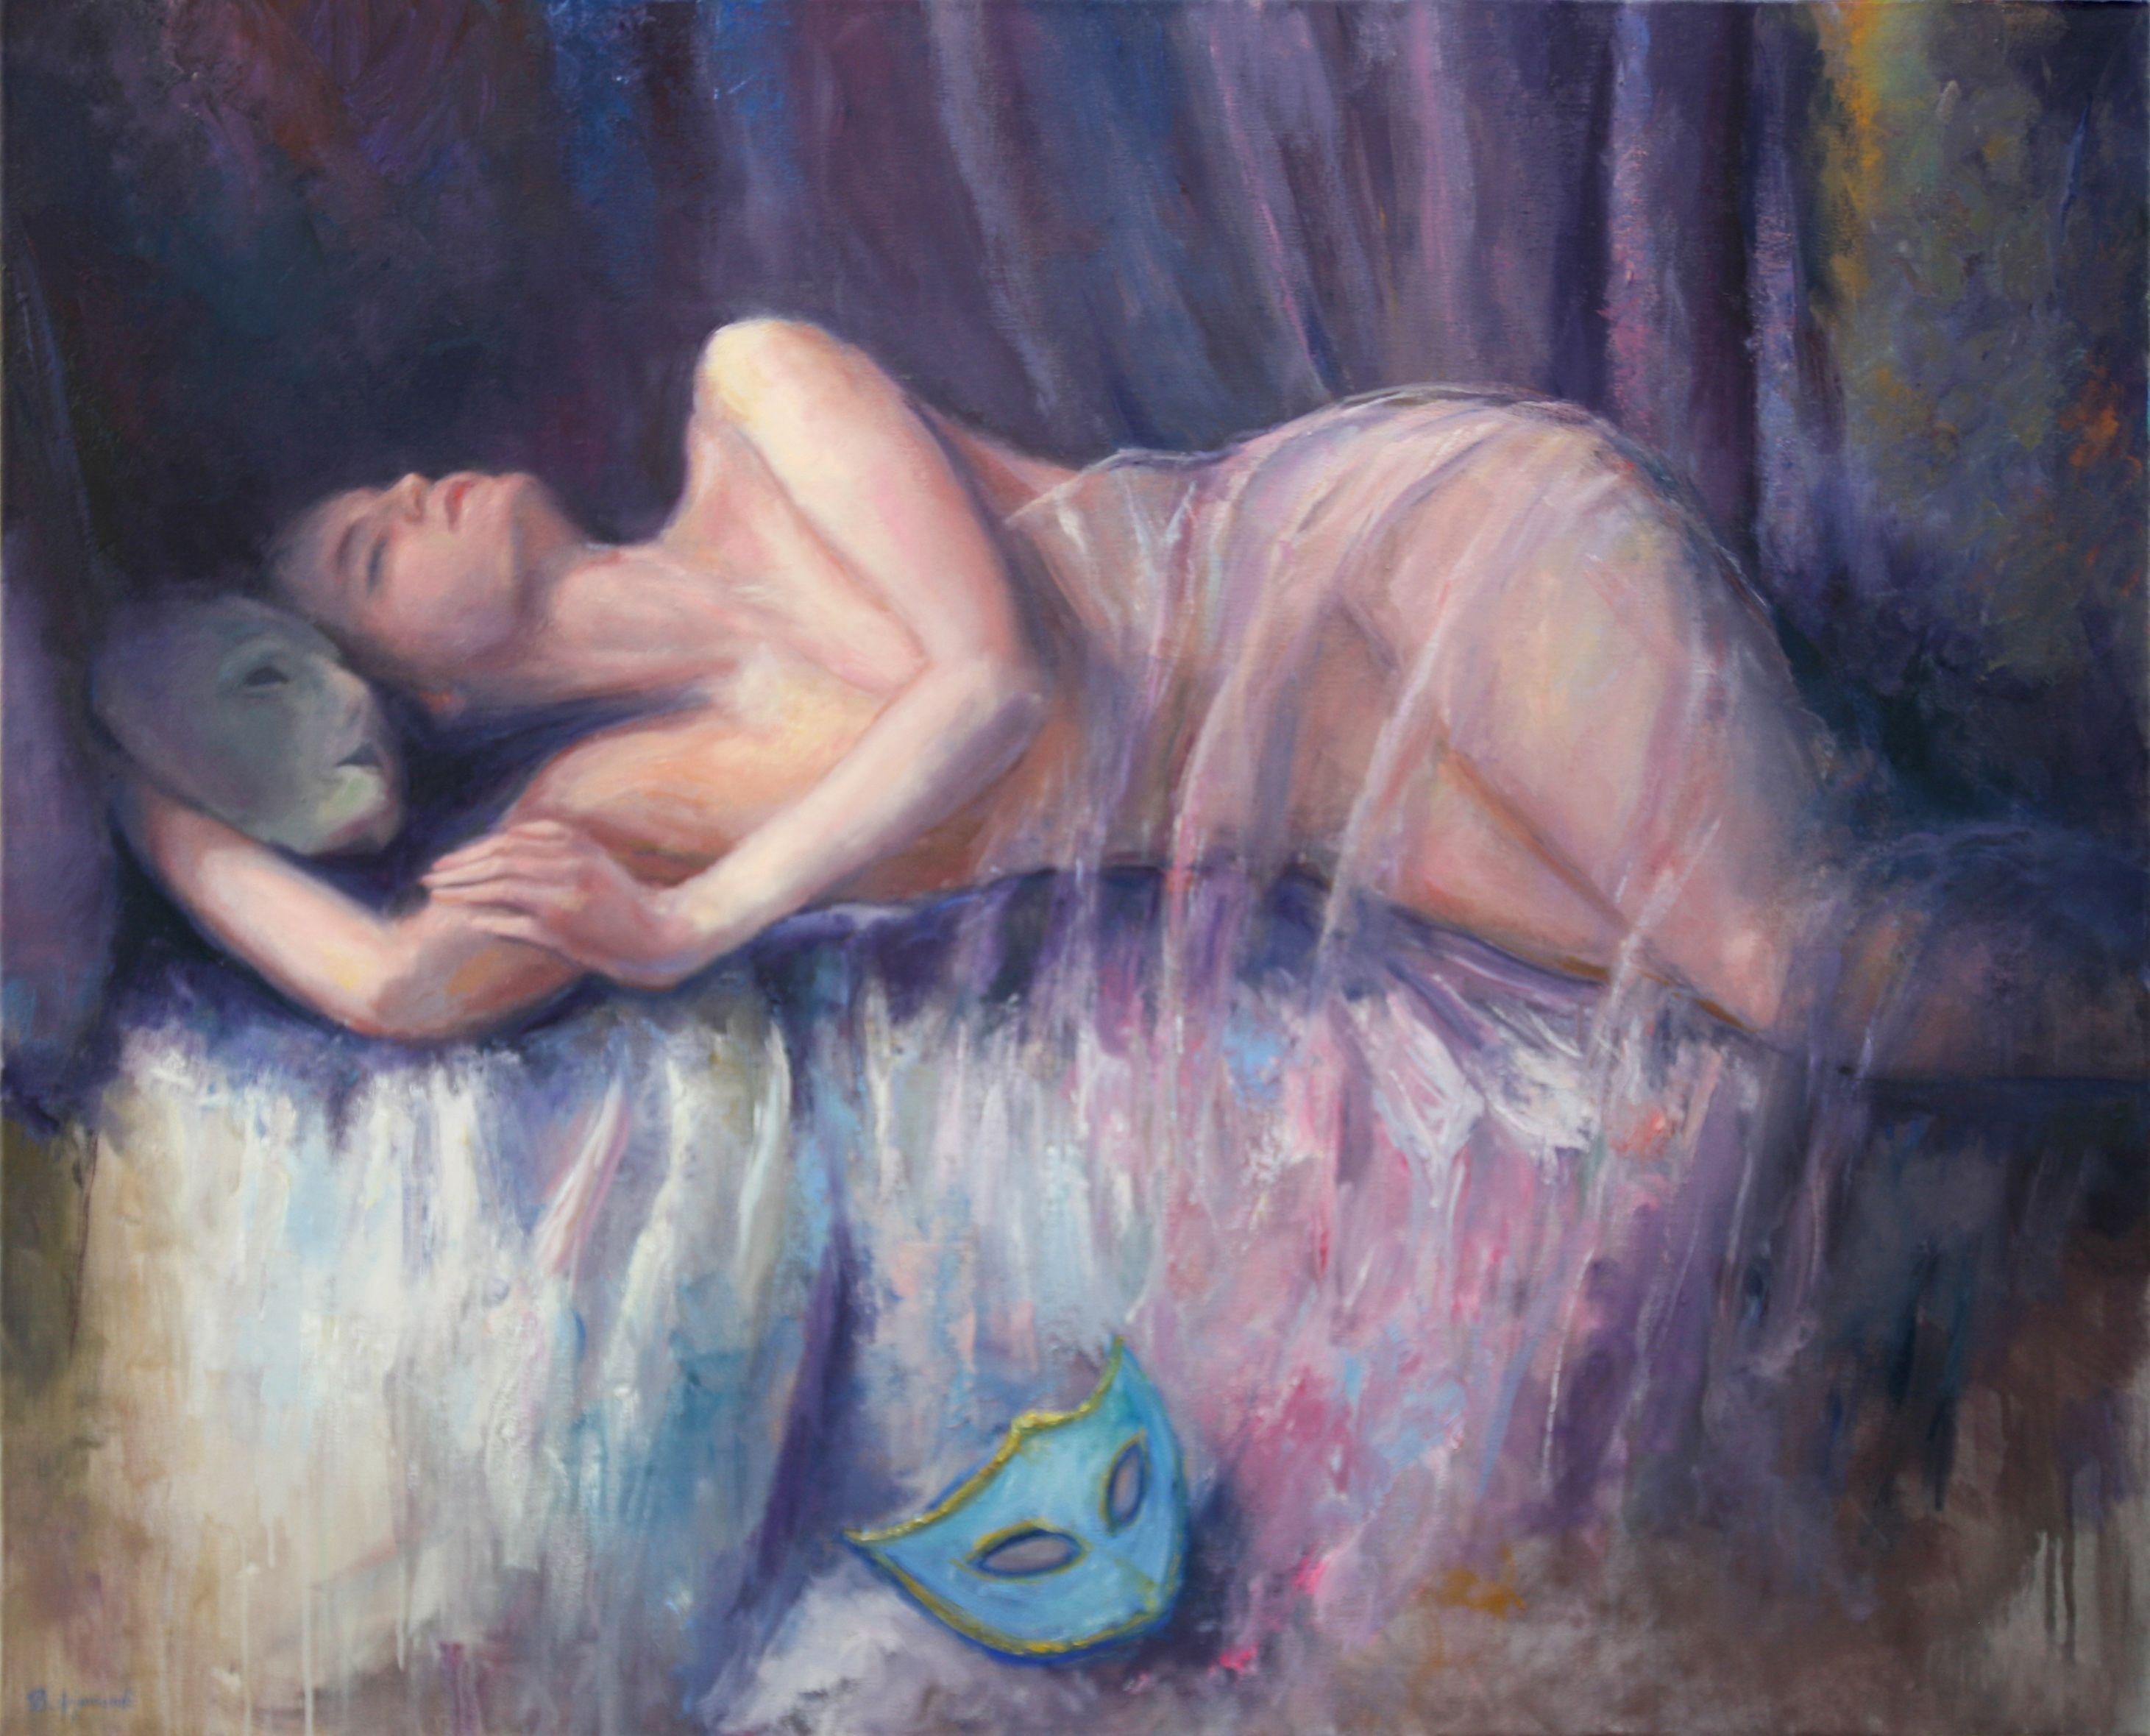 Dreaming, Painting, Oil on Canvas